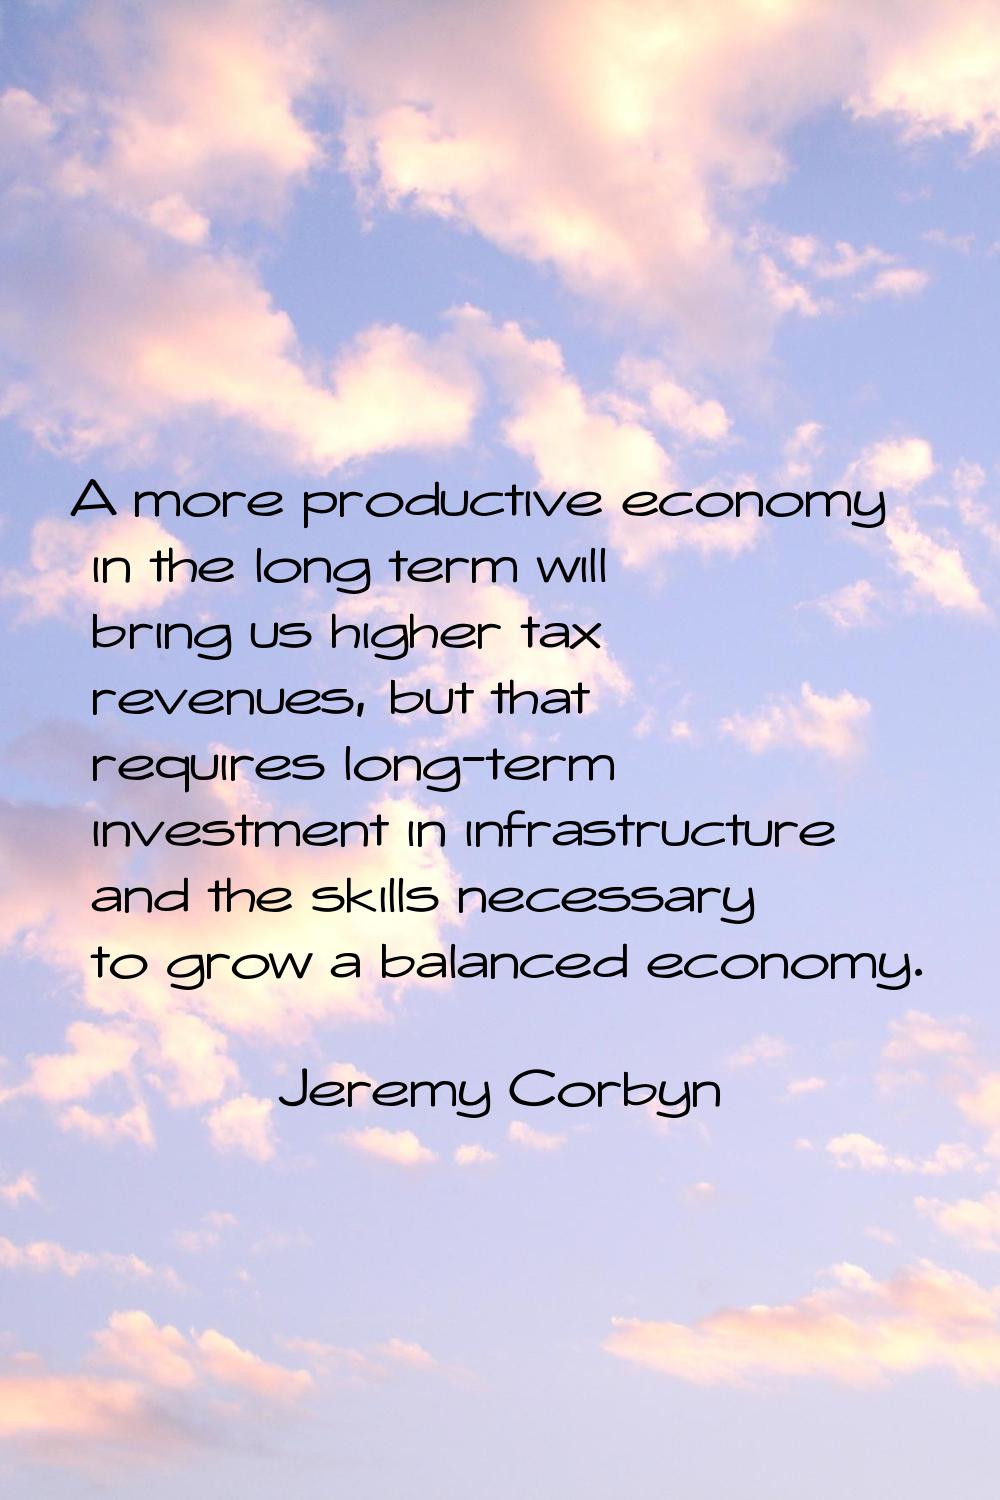 A more productive economy in the long term will bring us higher tax revenues, but that requires lon